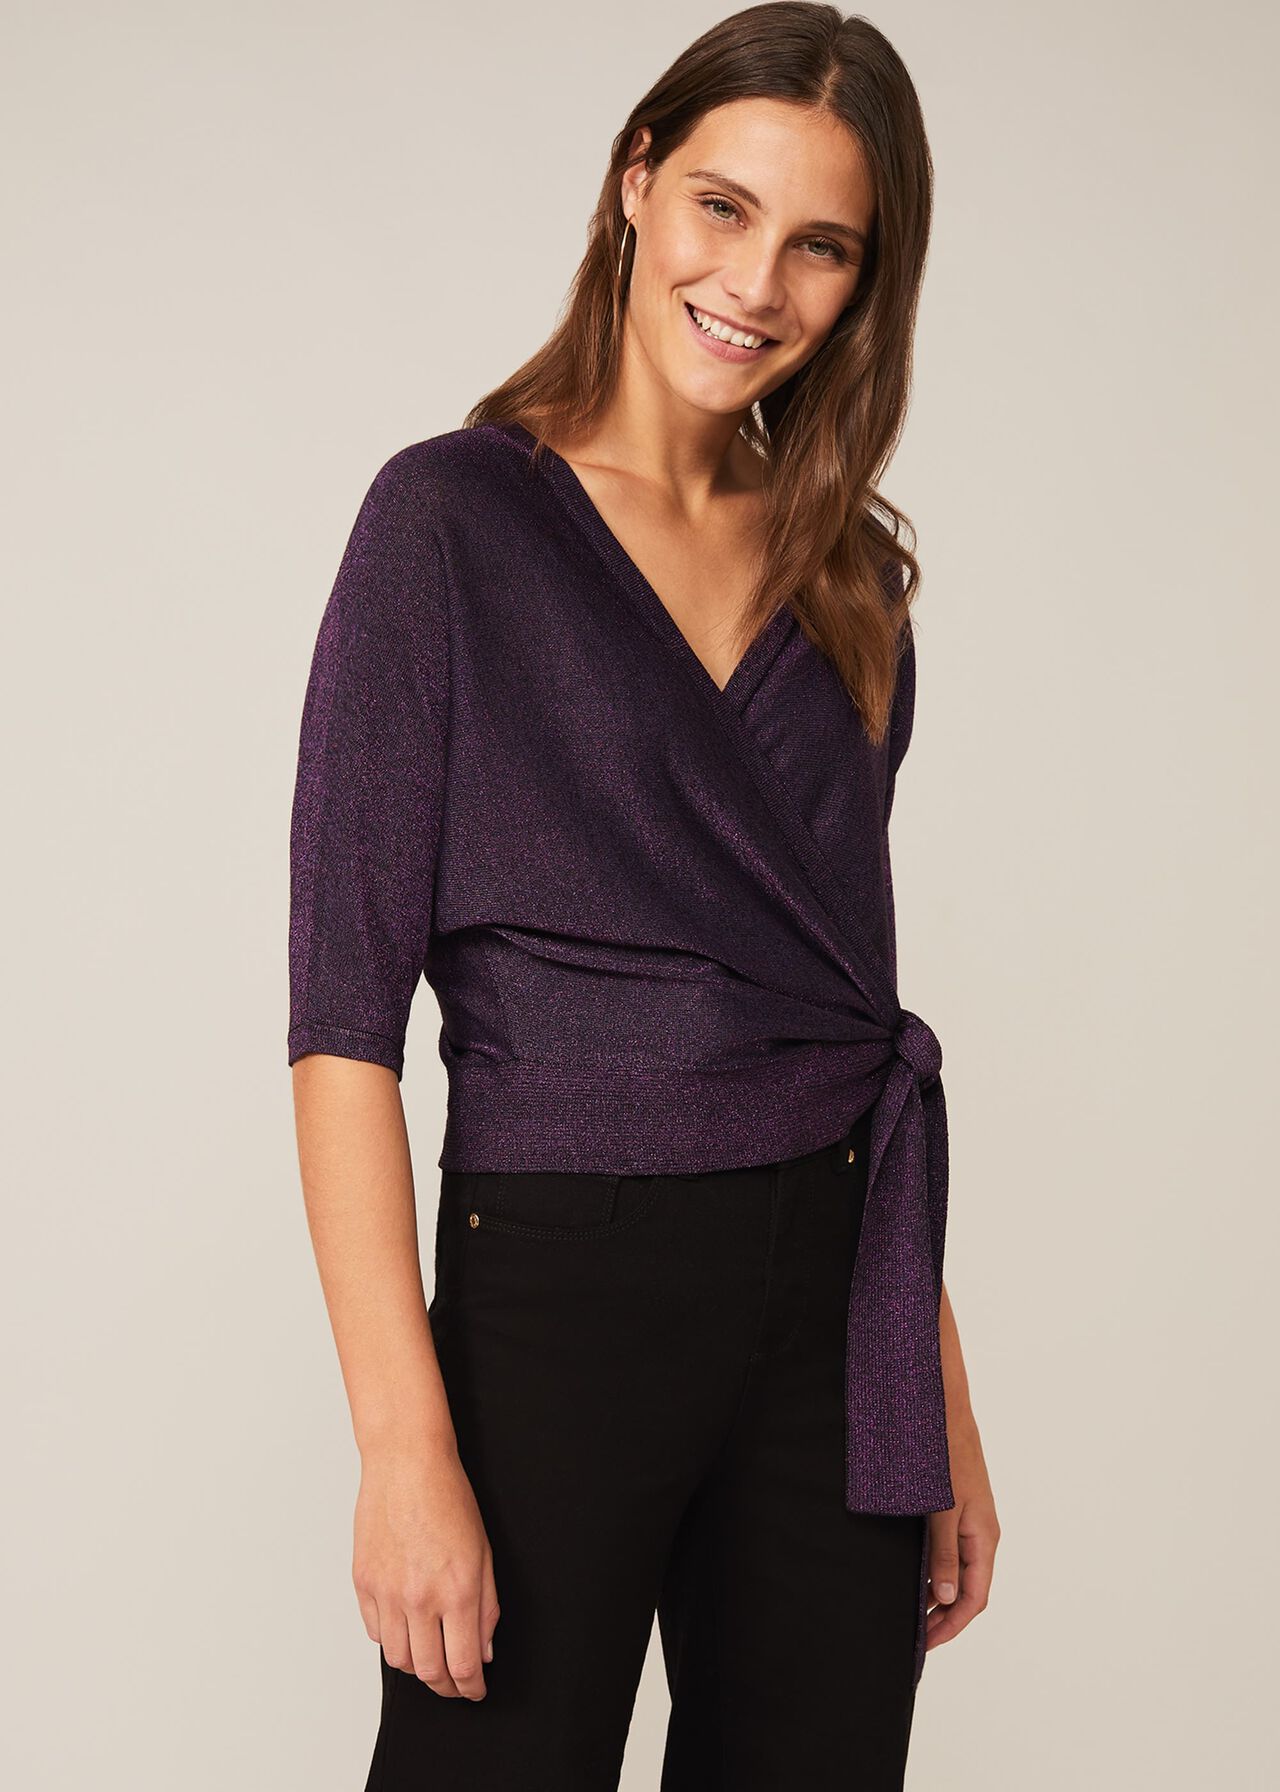 Harper Shimmer Wrap Knit Top | Phase Eight